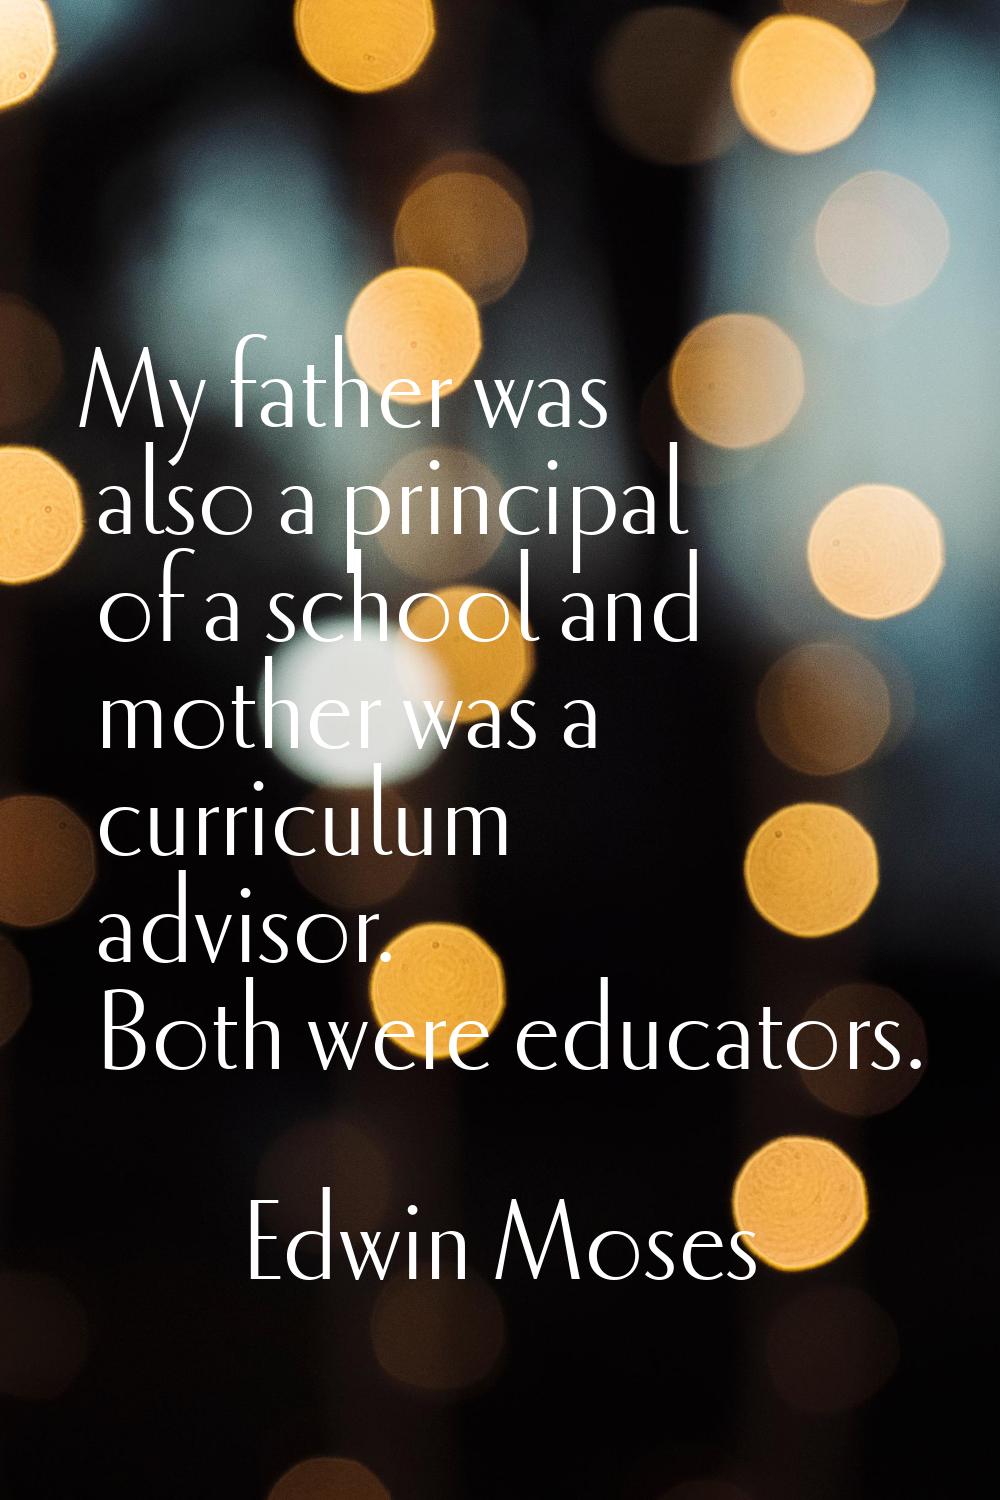 My father was also a principal of a school and mother was a curriculum advisor. Both were educators